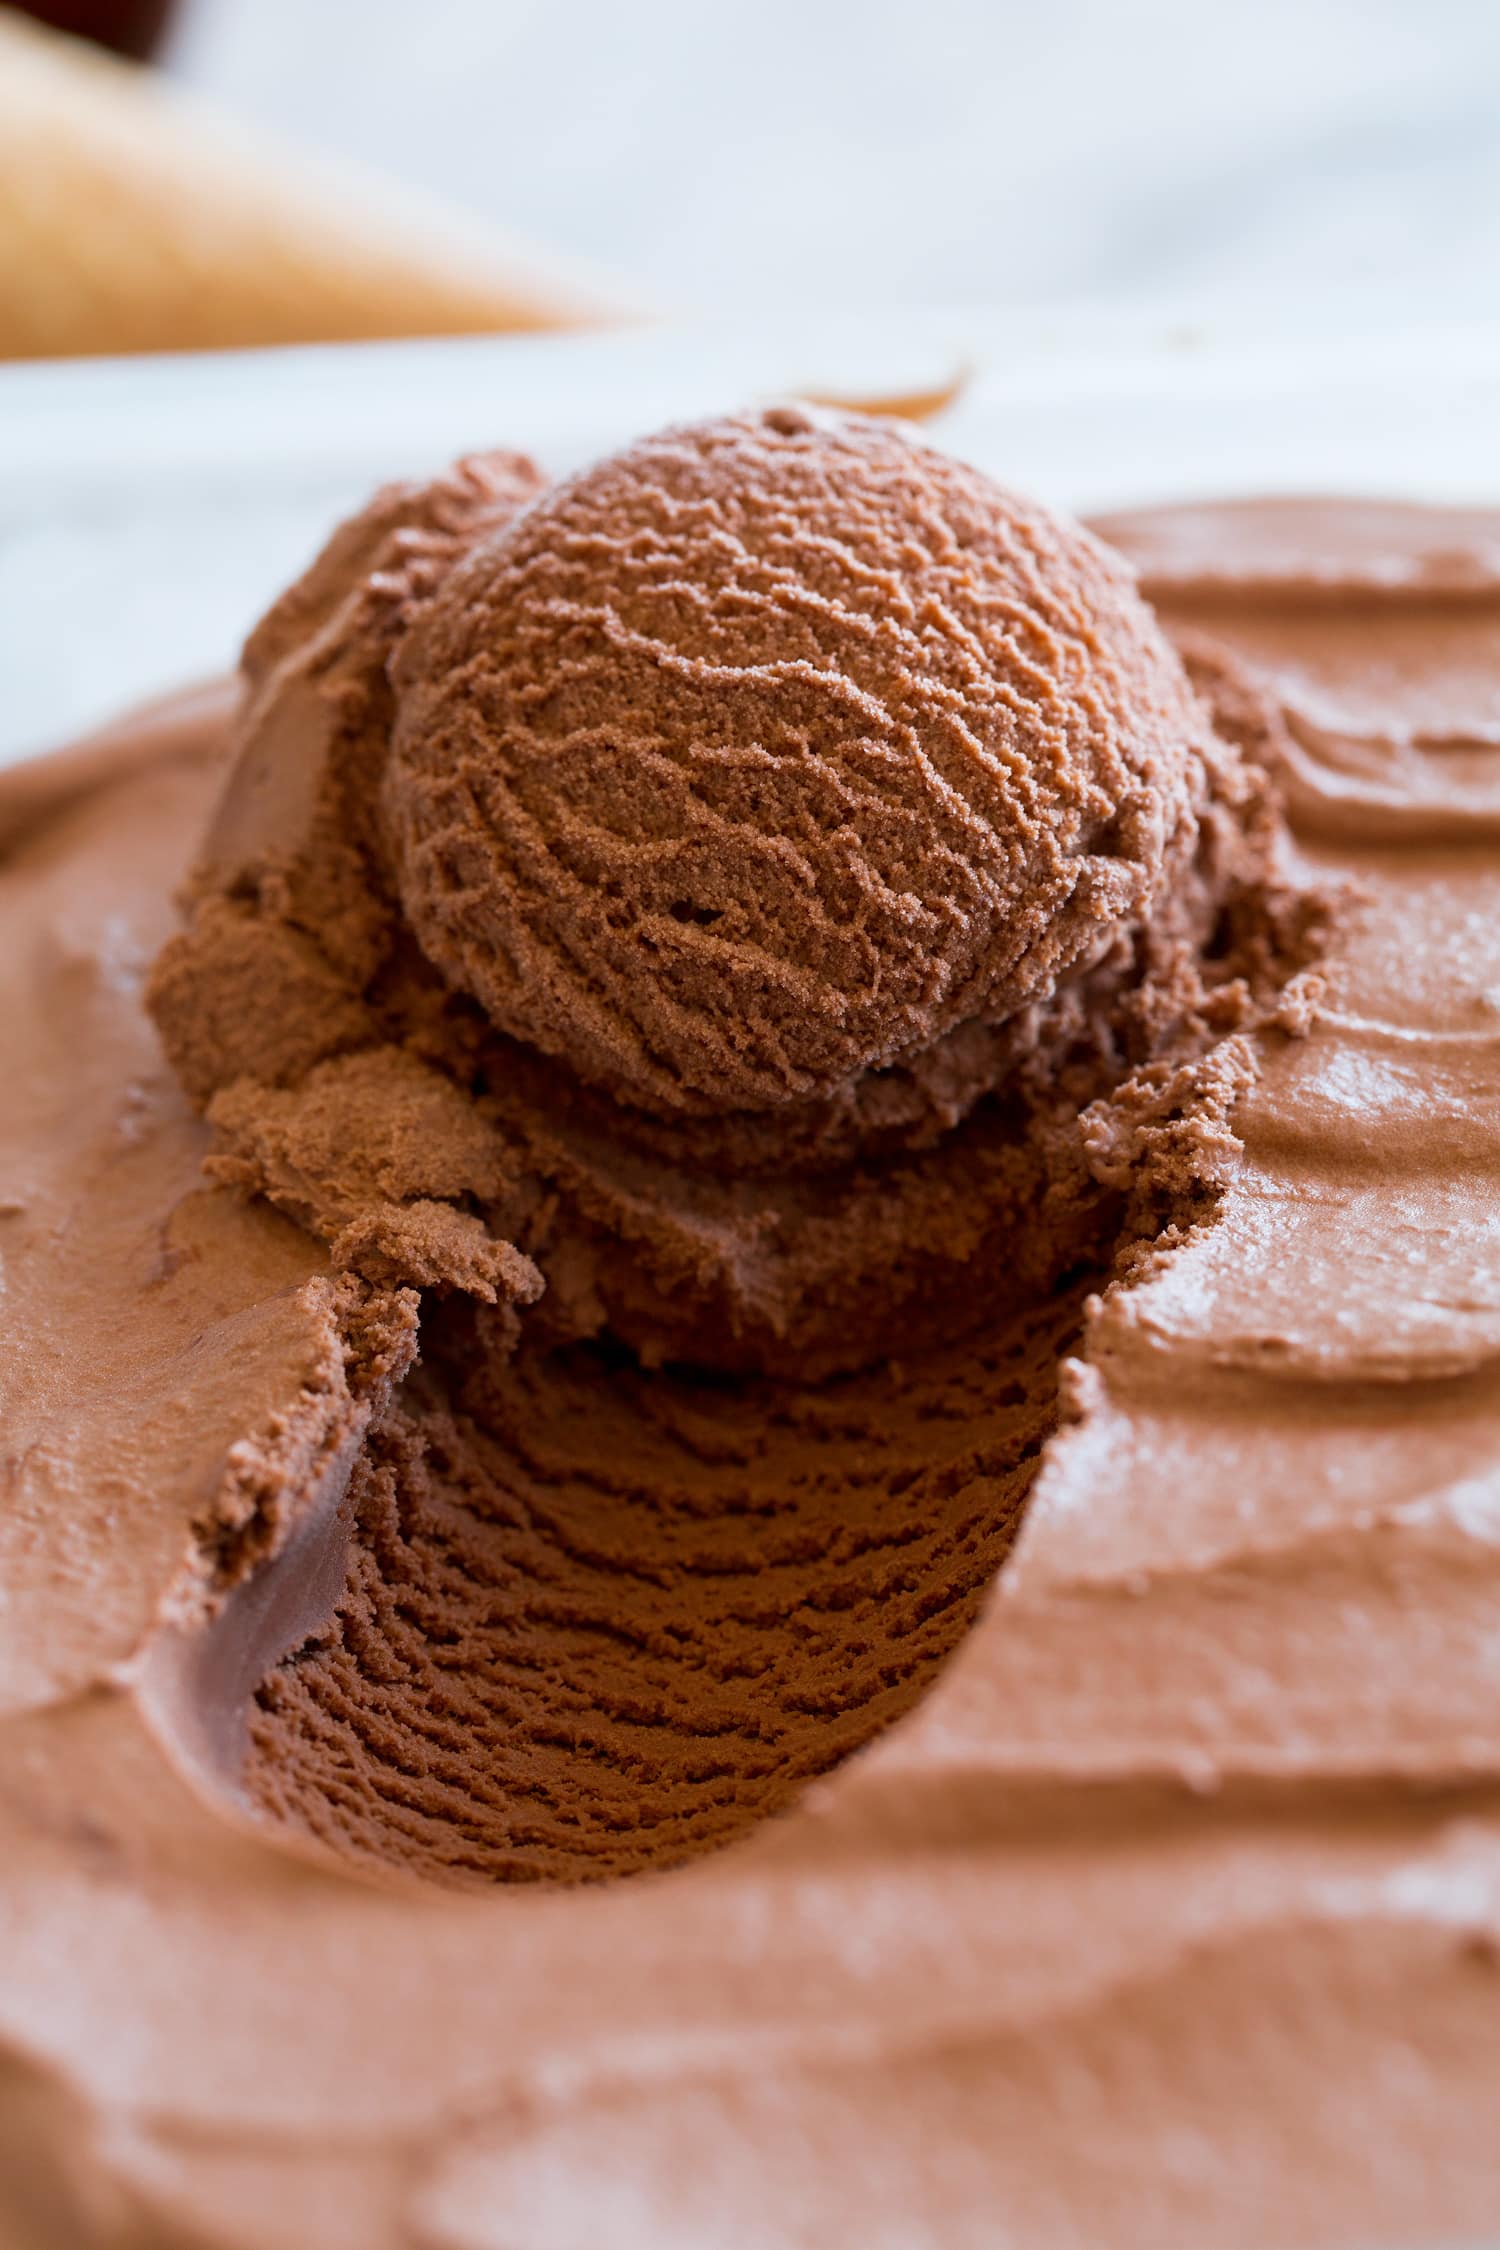 Close up photo of chocolate ice cream scooped from container.